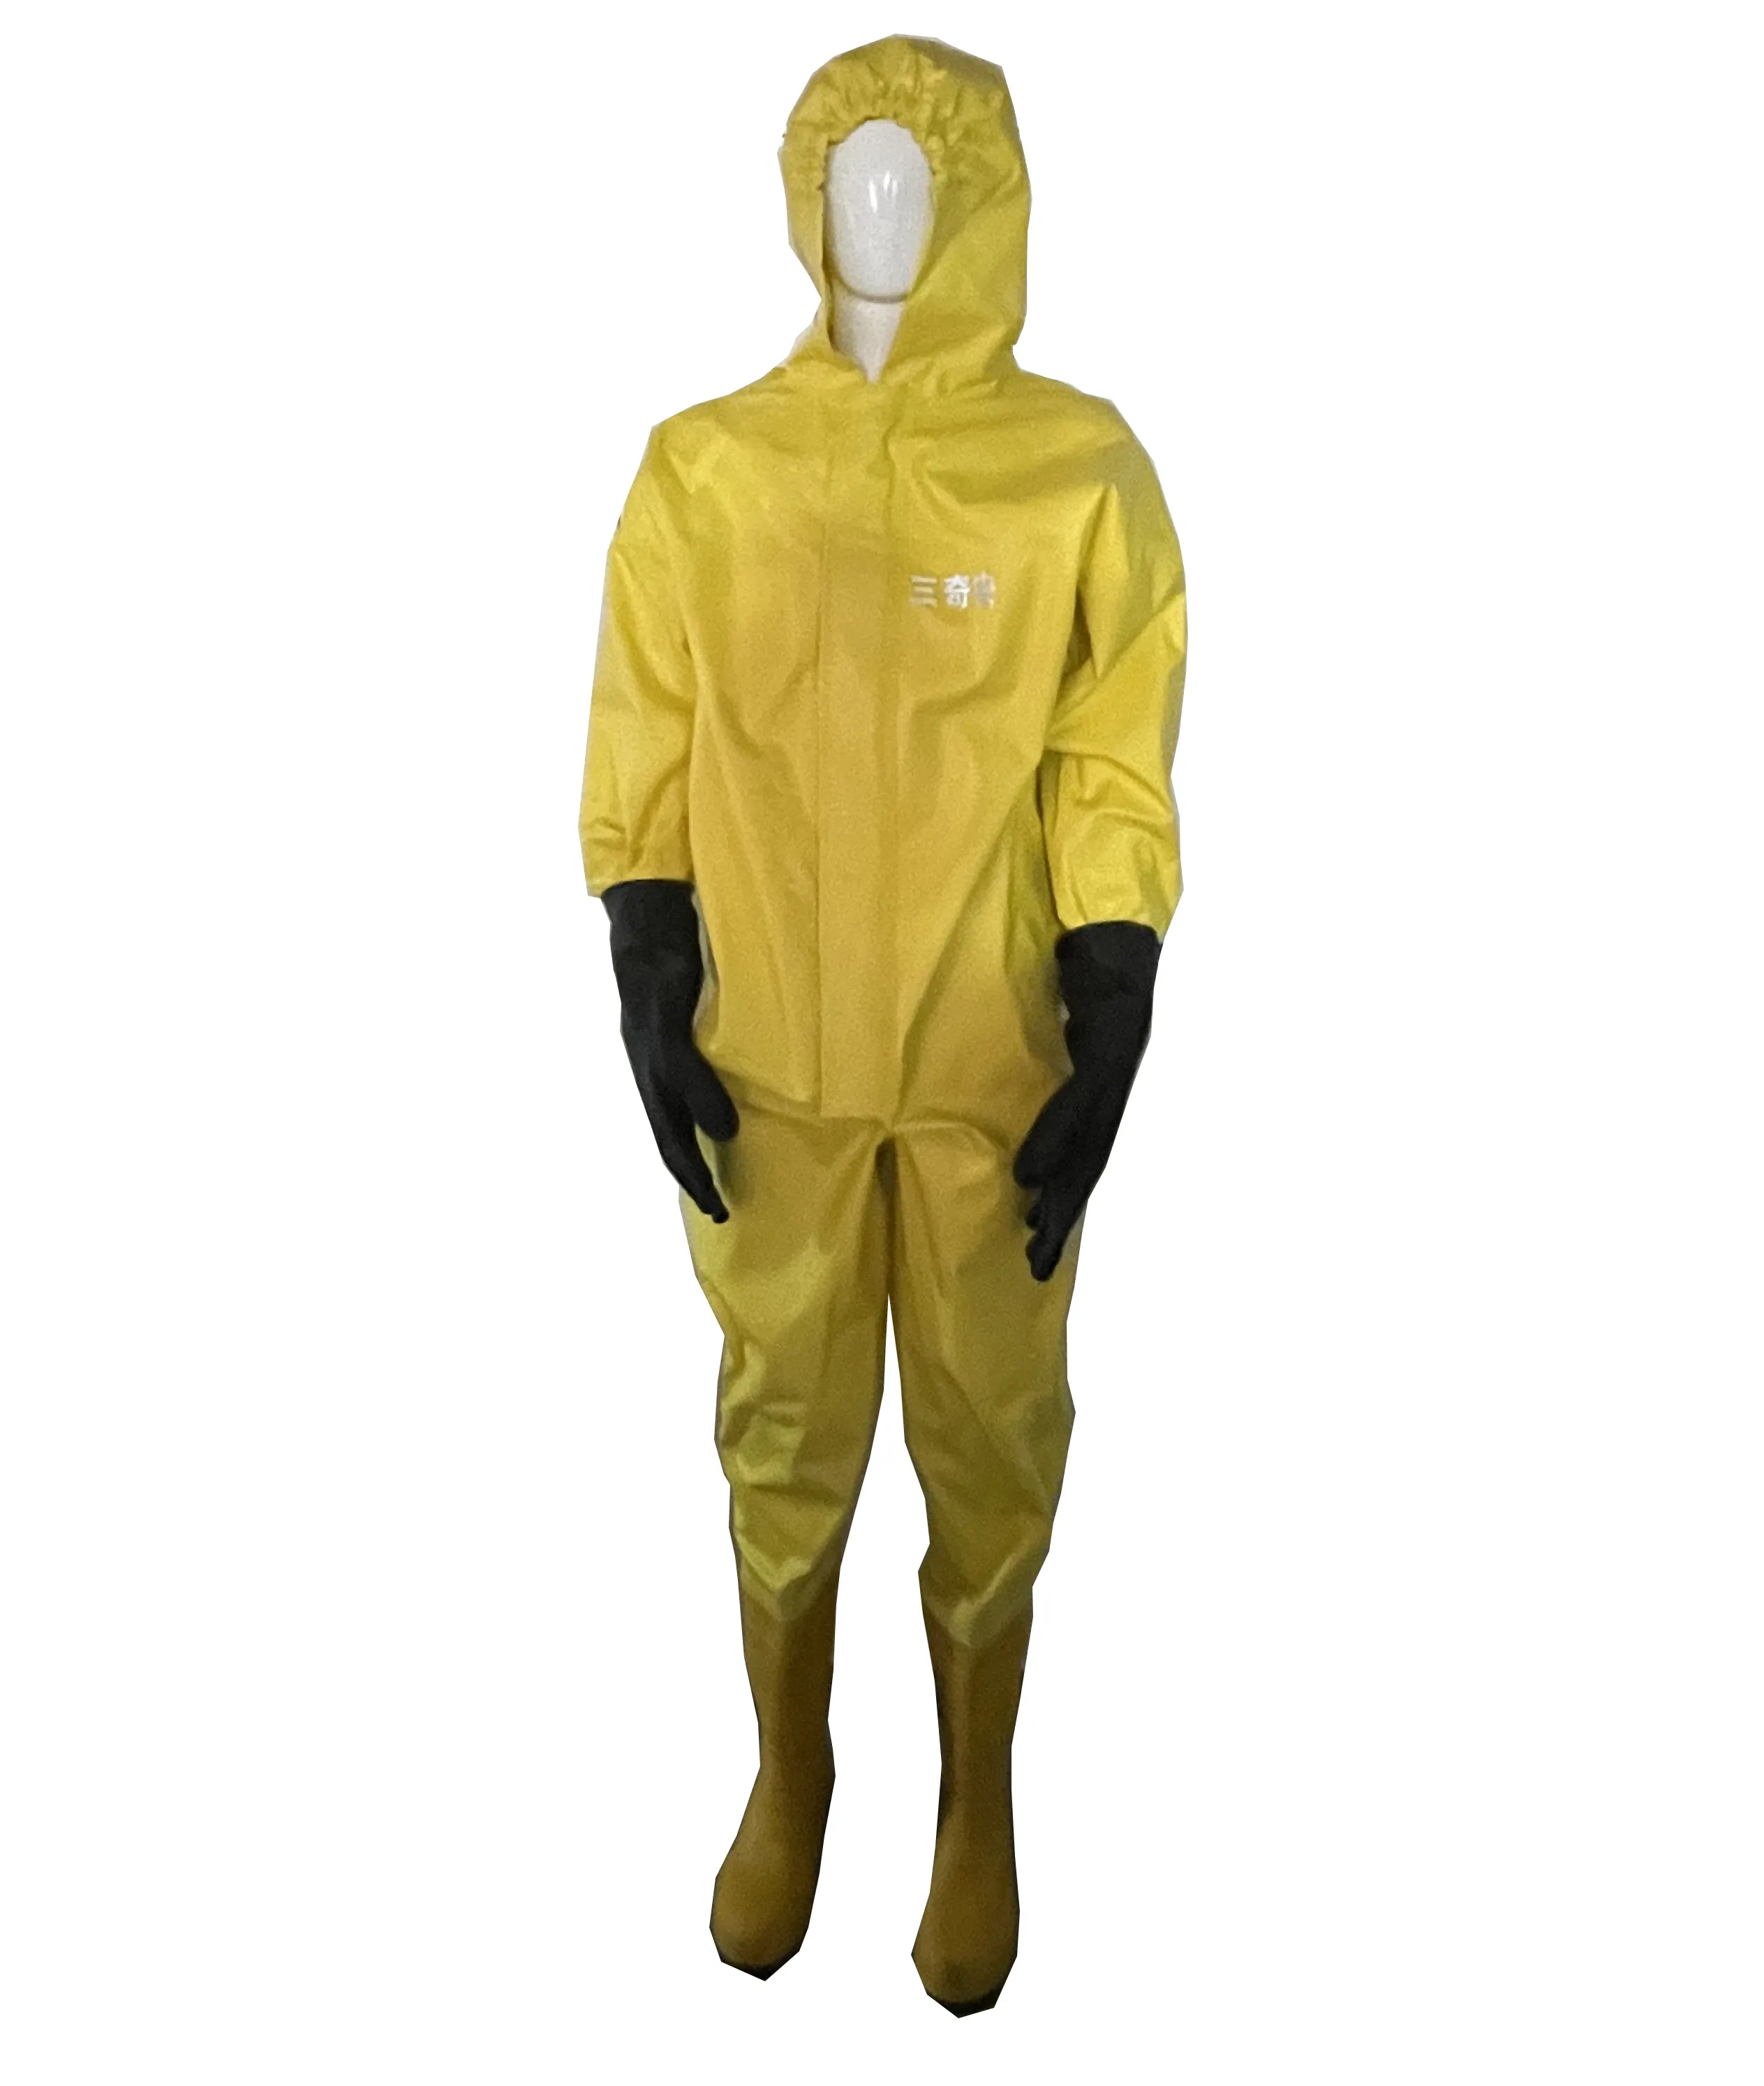 Hot Sale Butyl rubber Material Chemical Protective Body Safety Hazmat Coveral Chemical Protective Suit